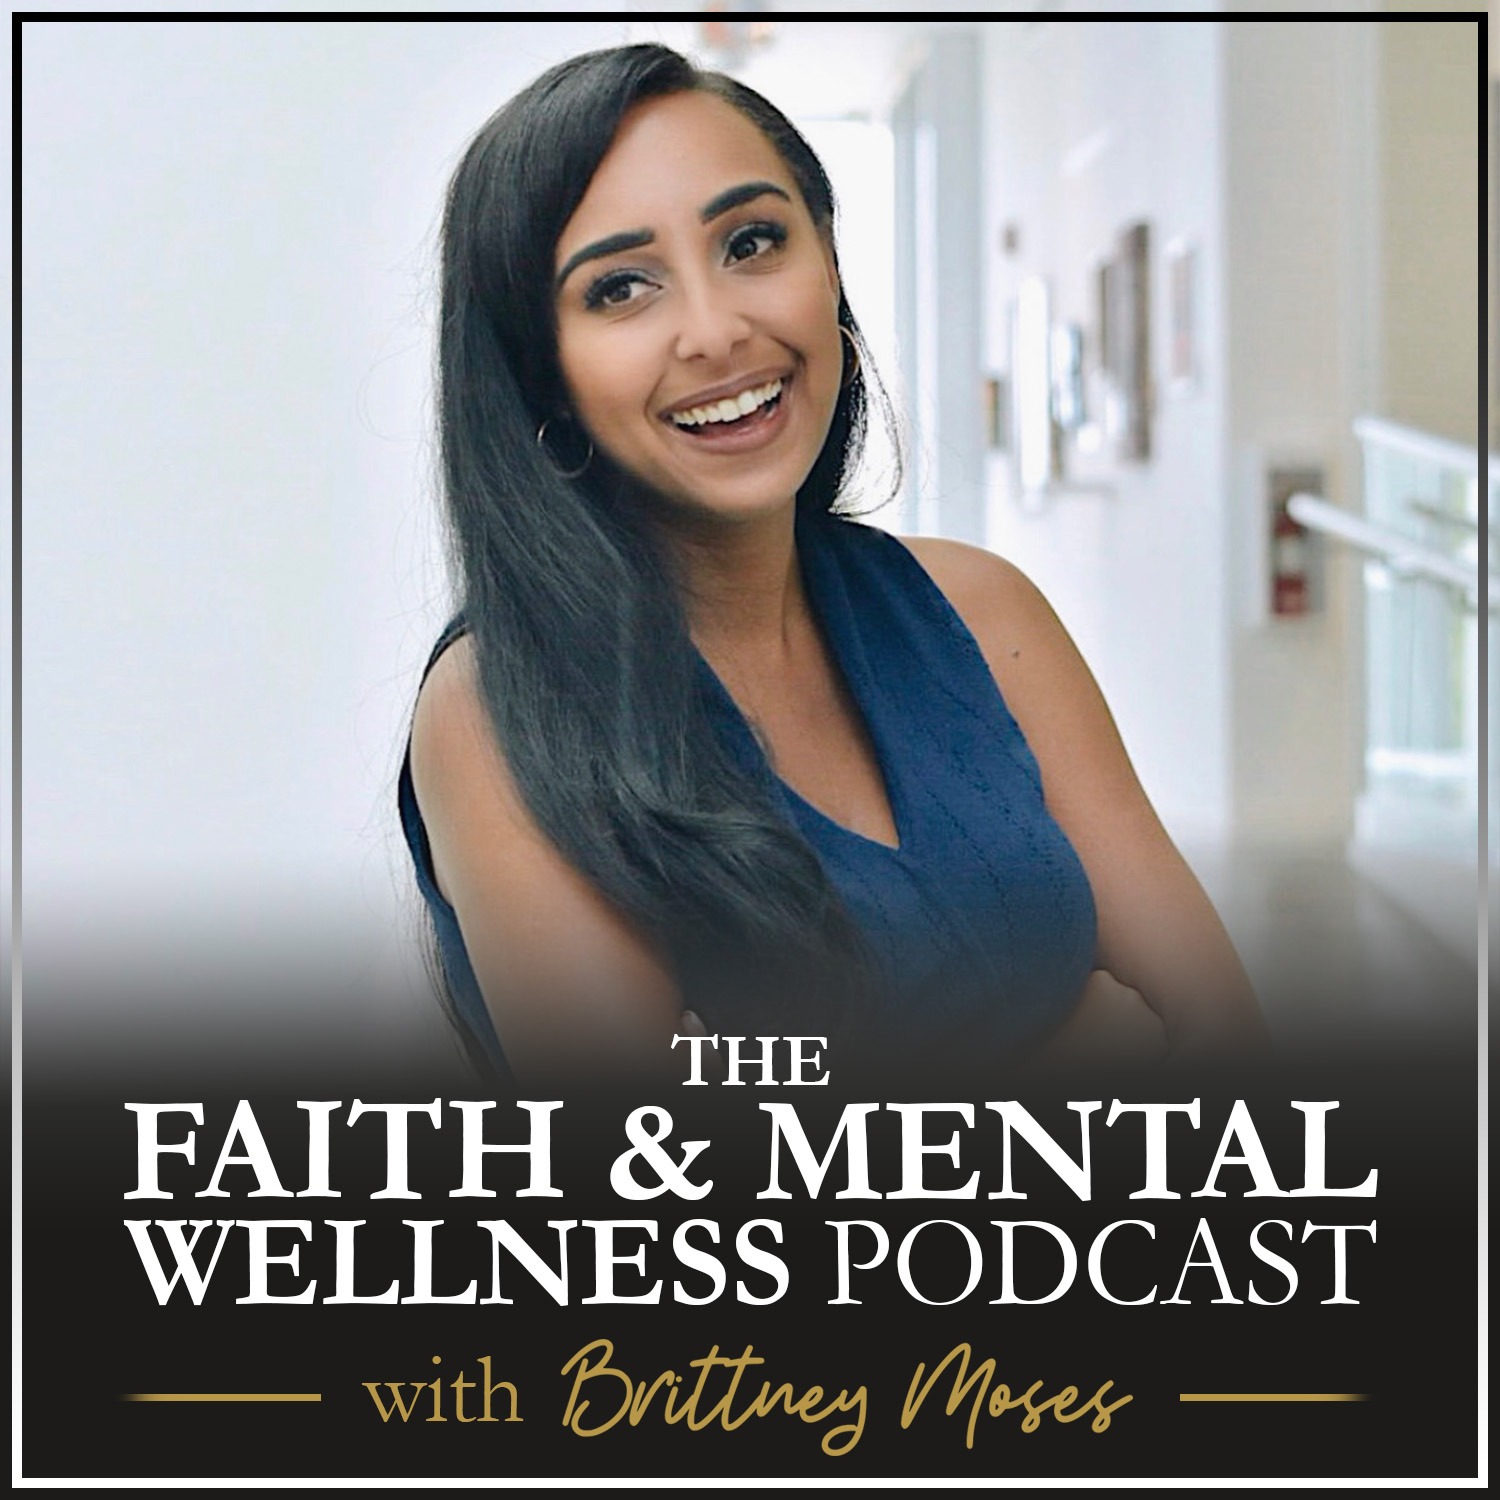 009: A Clinical & Biblical Perspective on Mental Health with Dr. Matthew Stanford